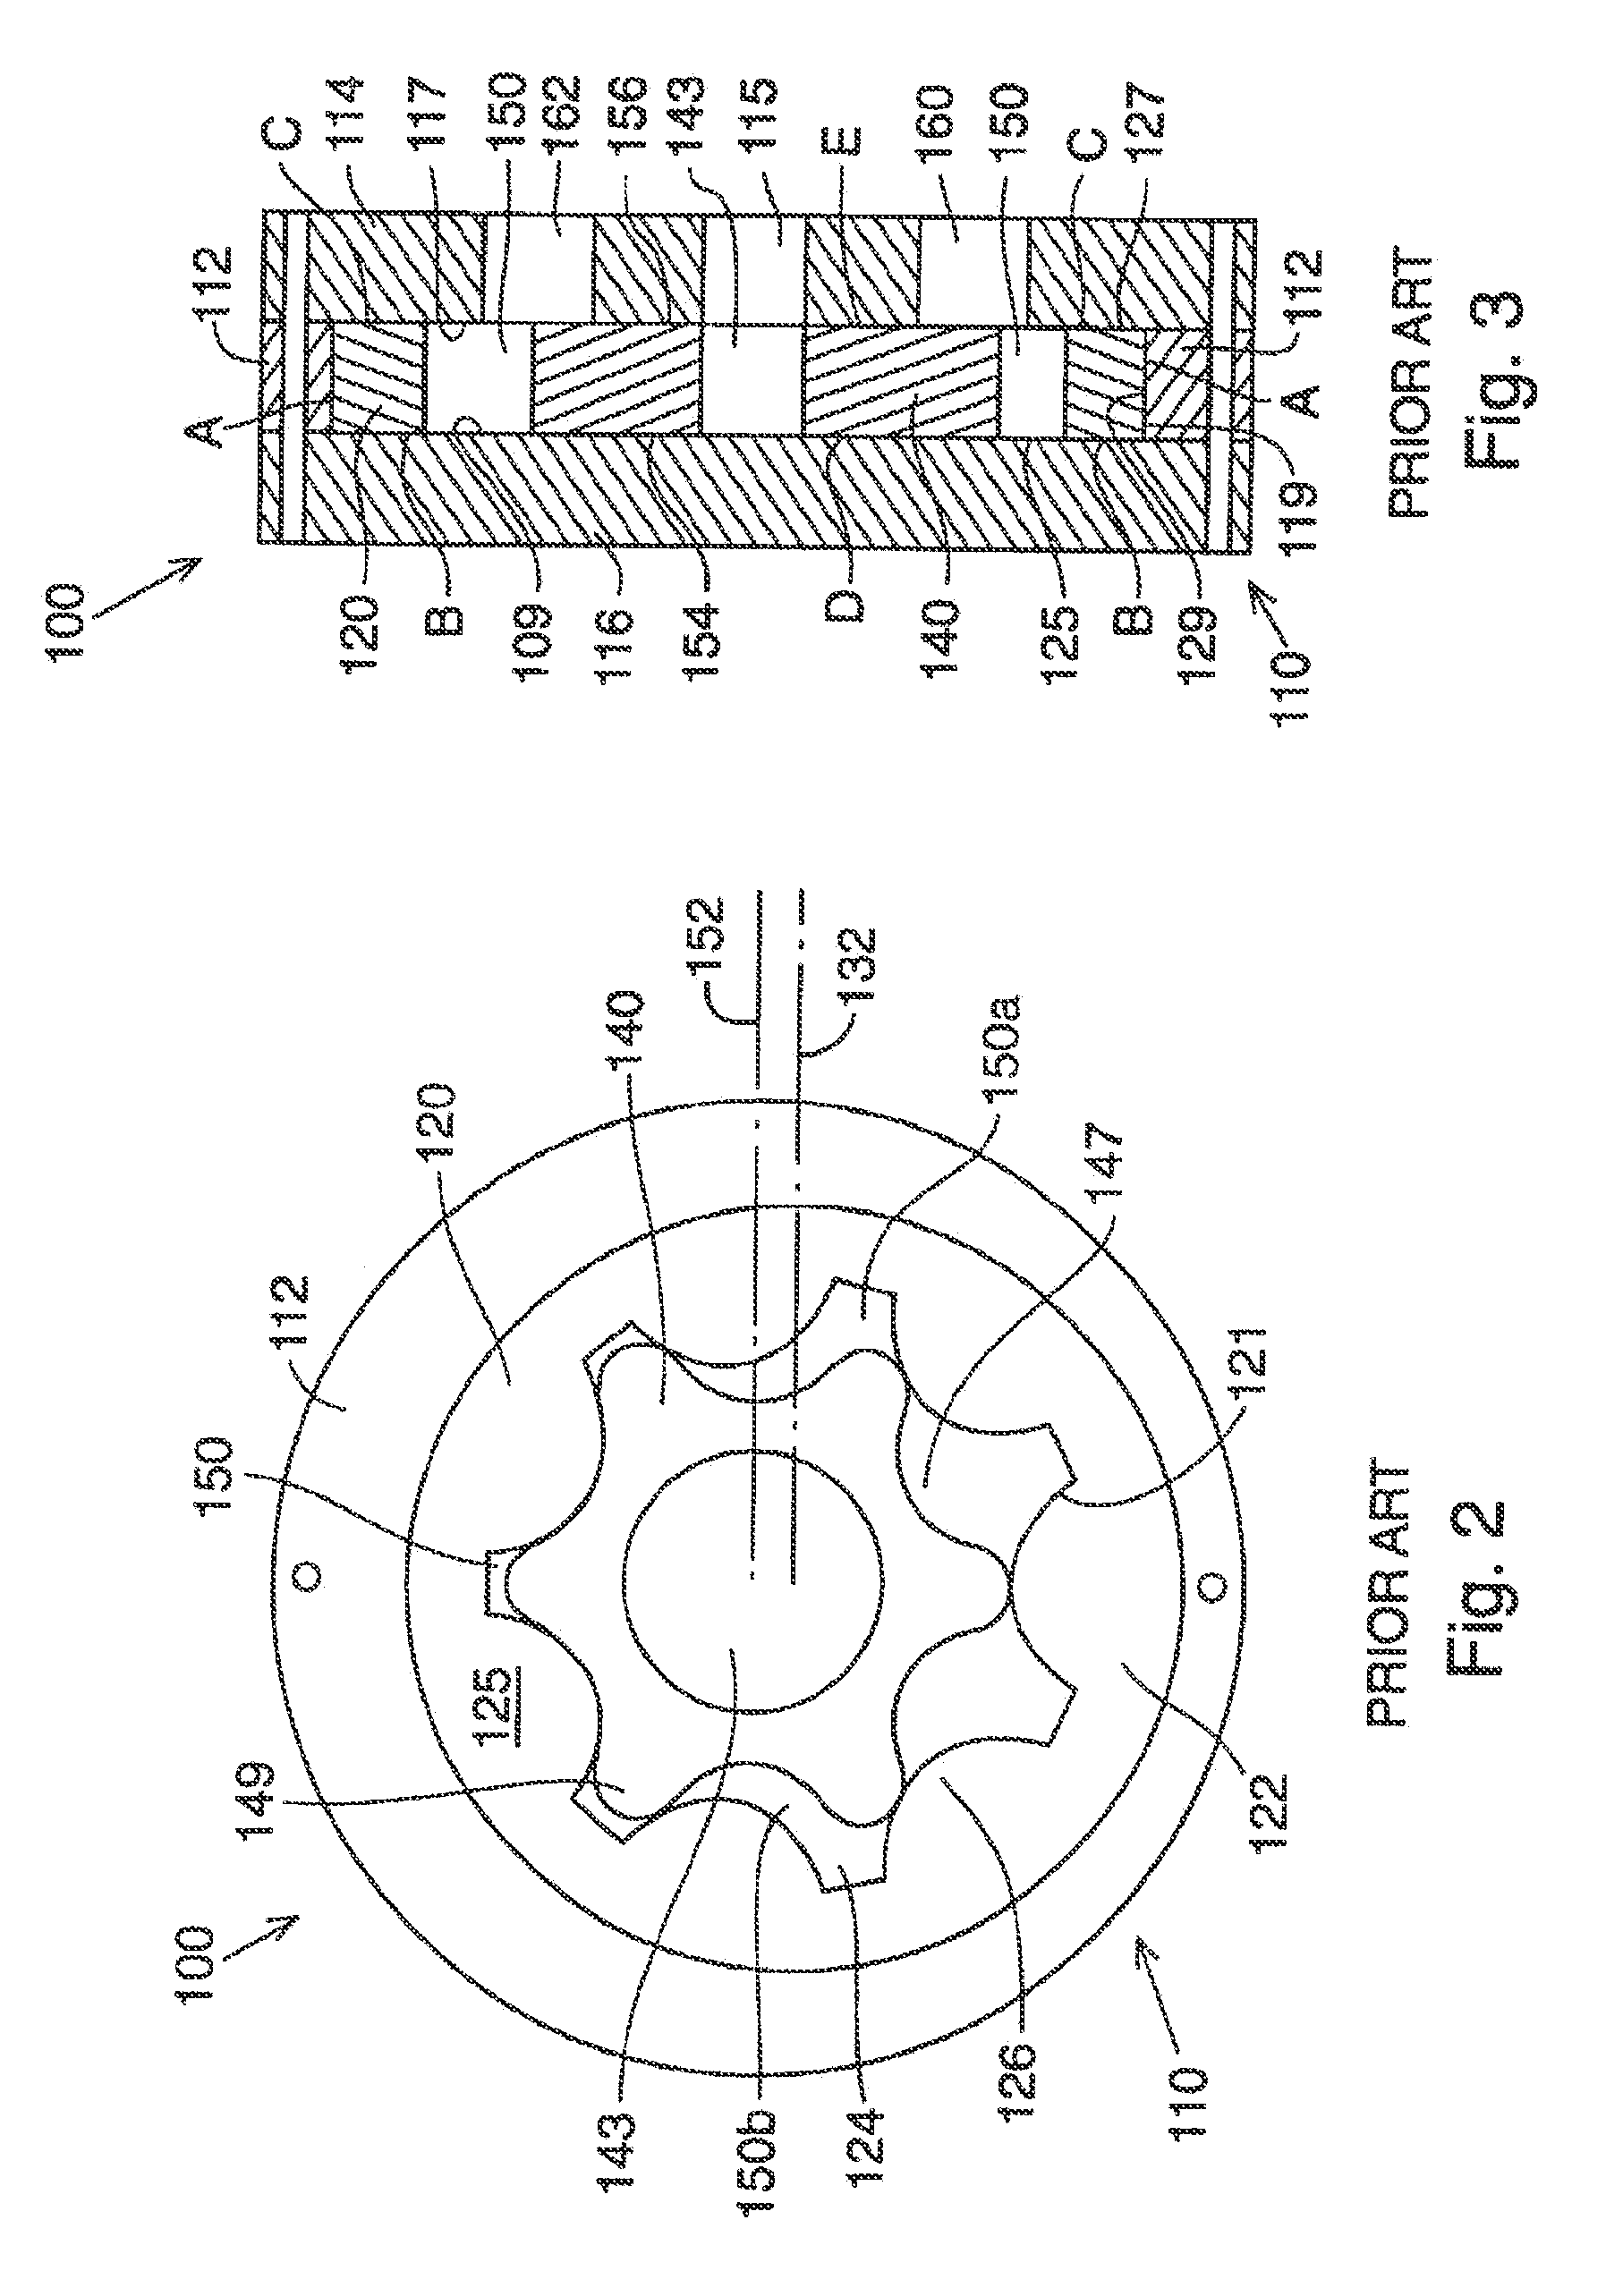 Fluid energy transfer device with improved bearing assemblies